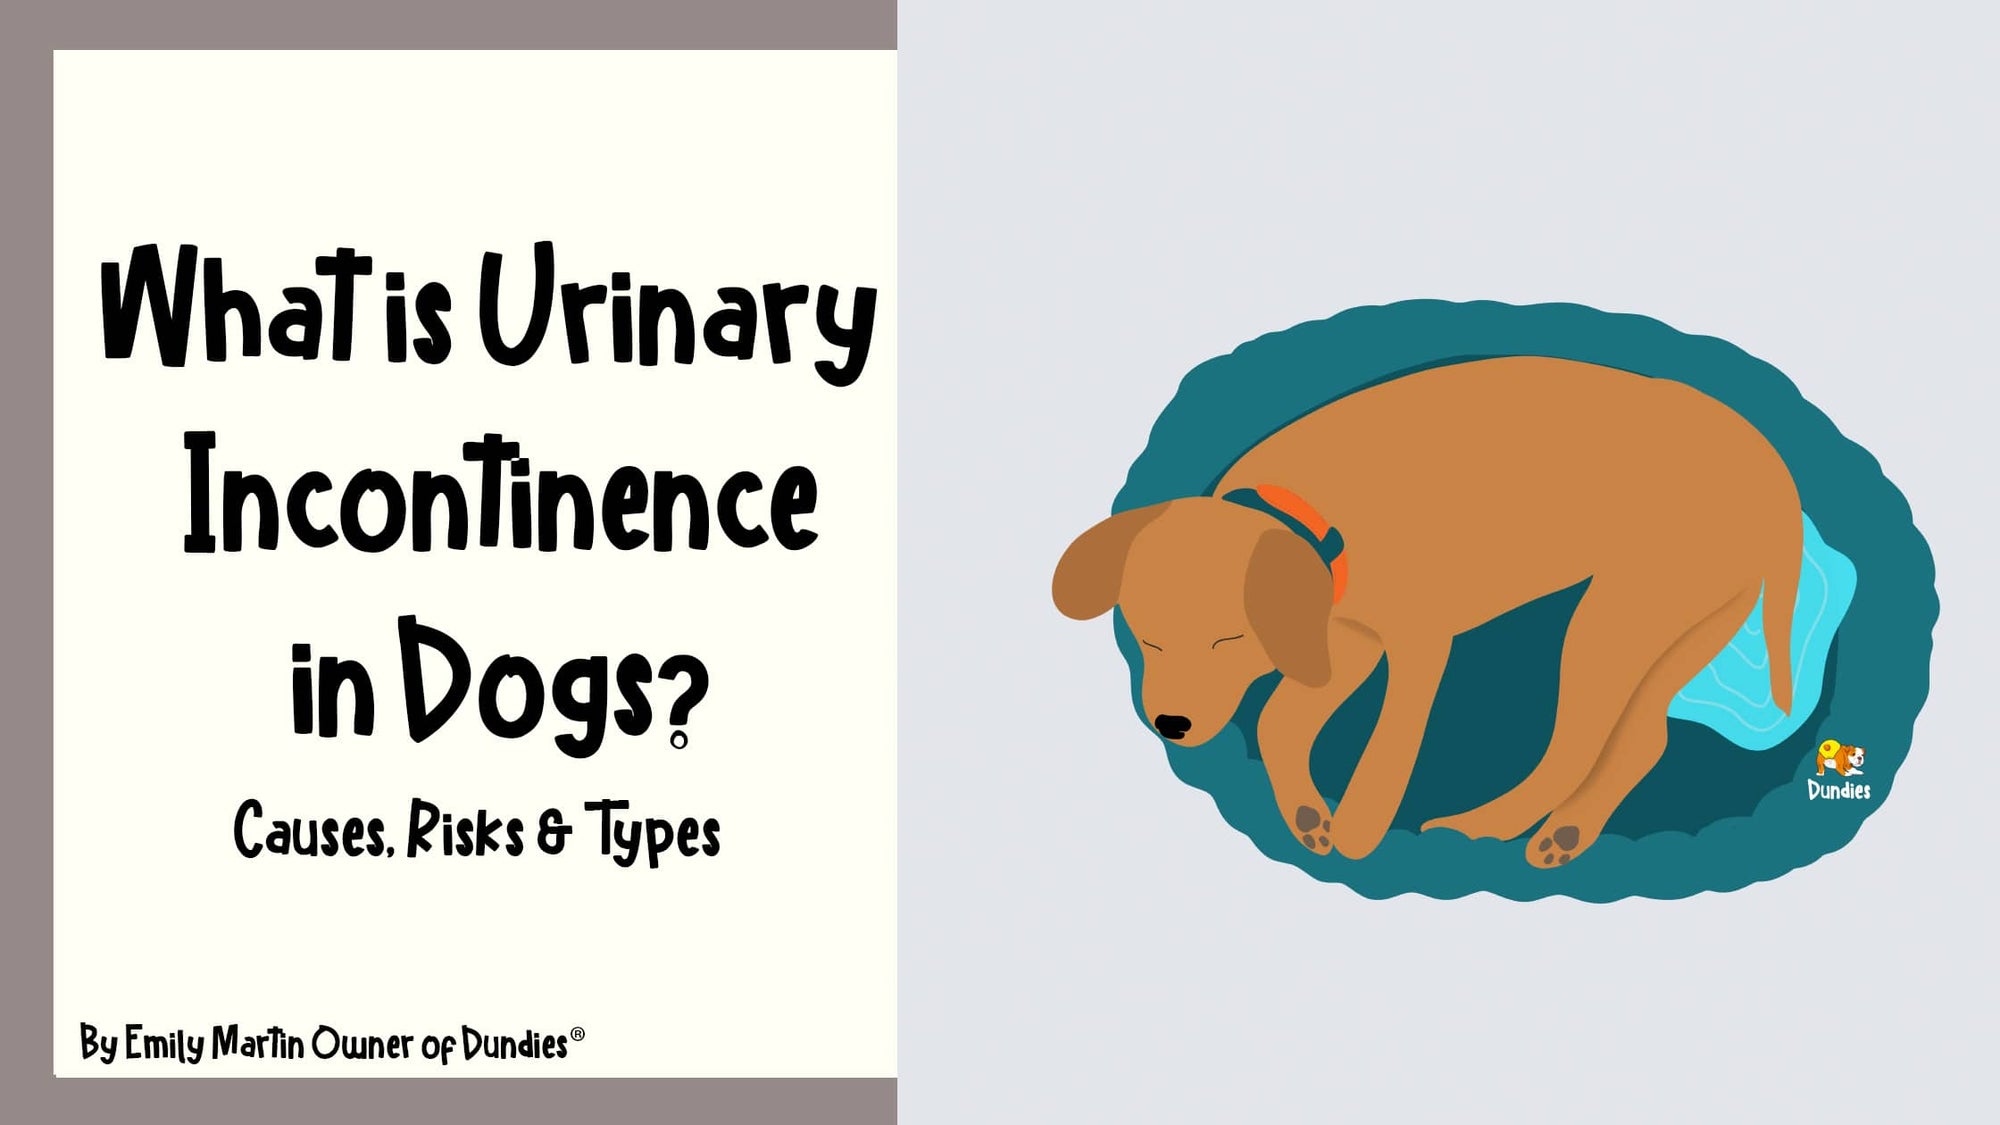 Is My Dog Suffering Urinary Incontinence?